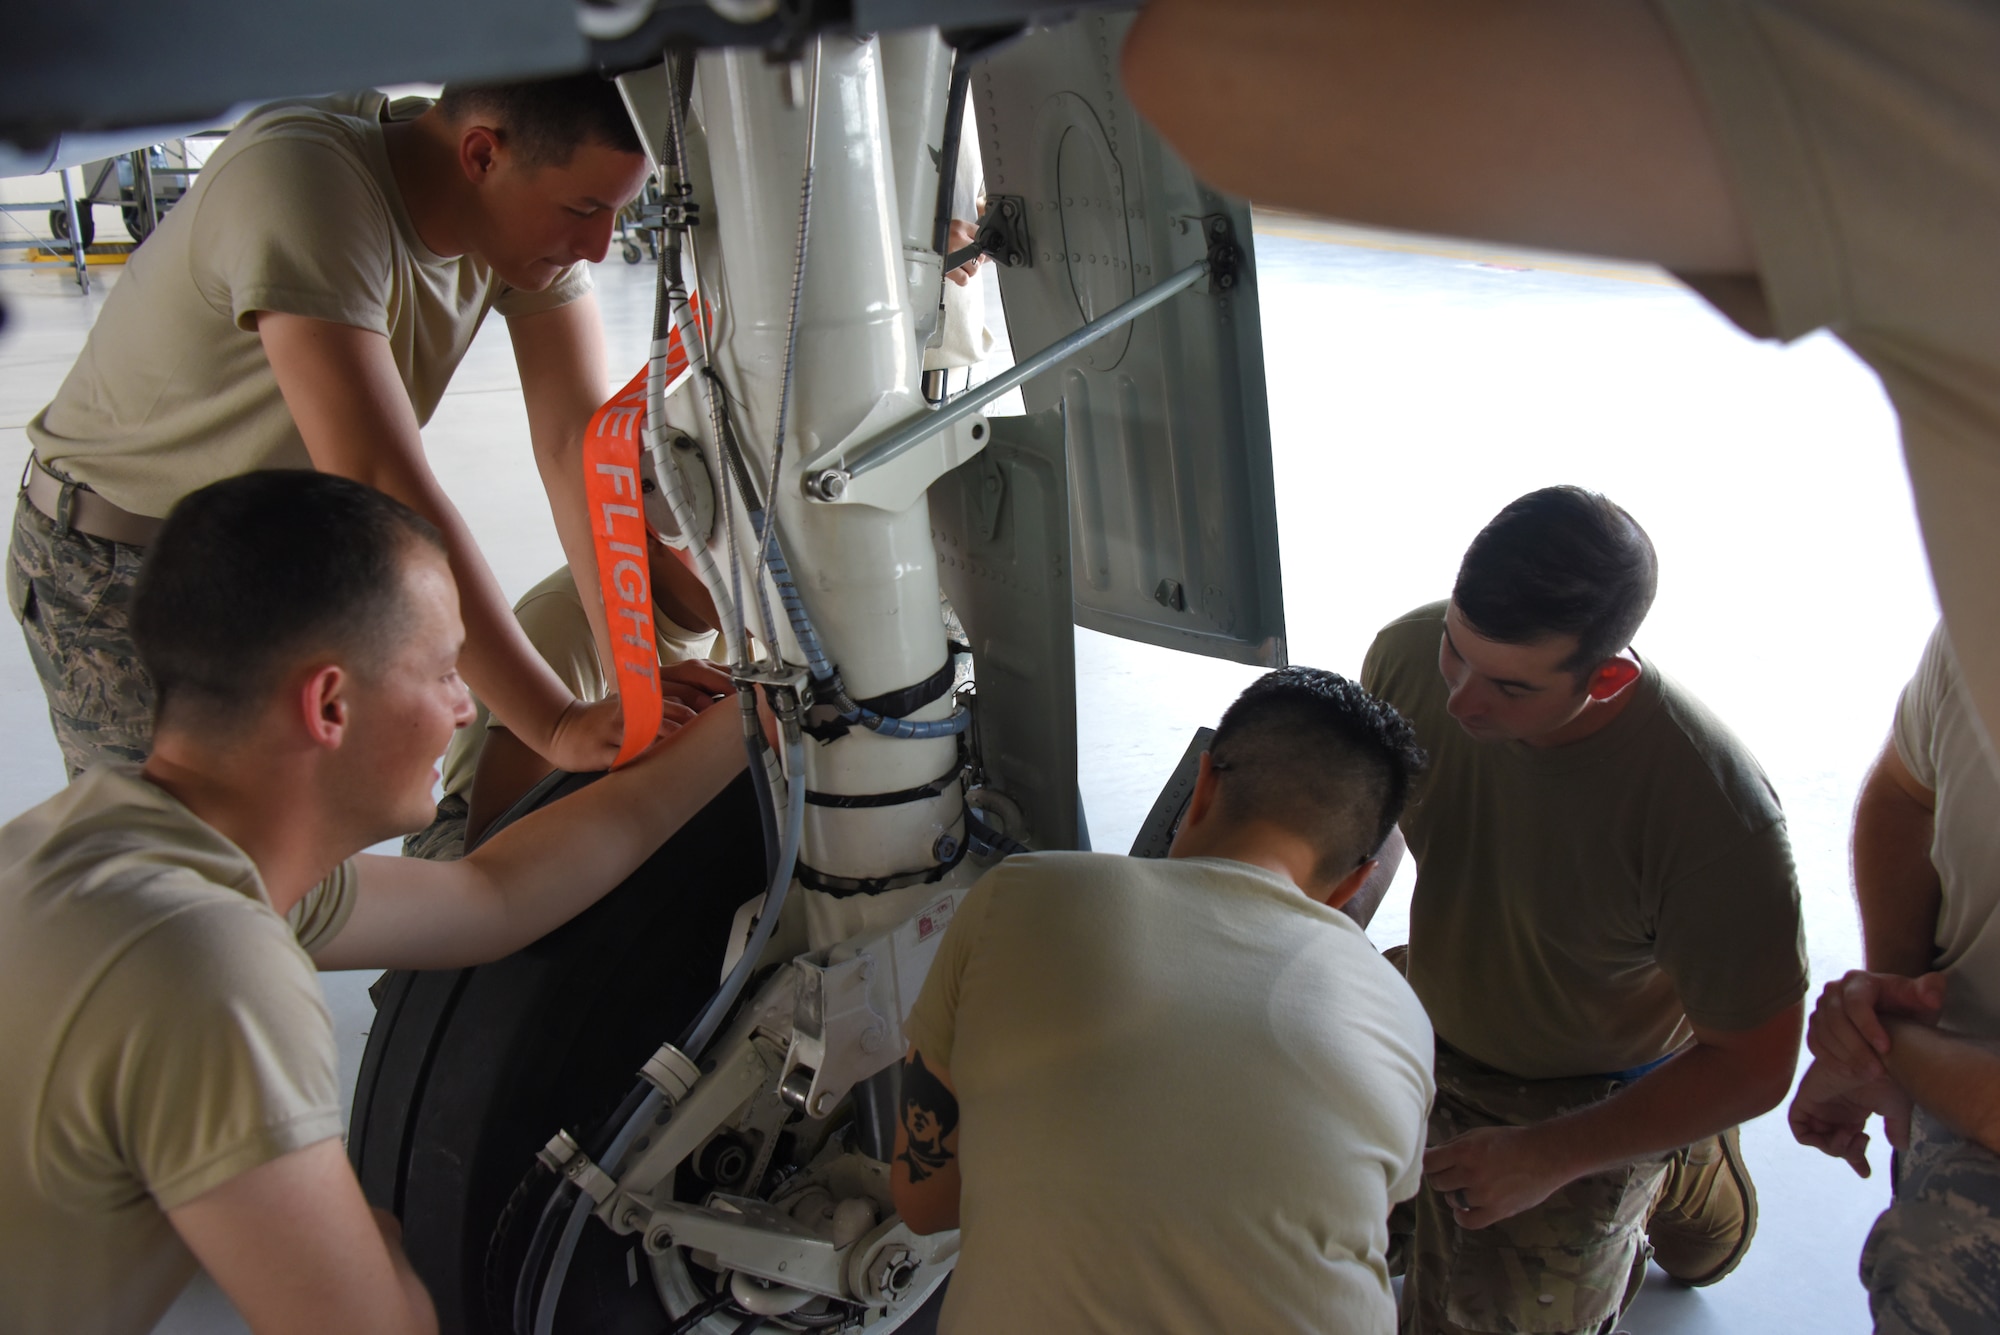 362nd Training Squadron instructor and students review lower torque arm of an A-10 at Sheppard AFB, TX.